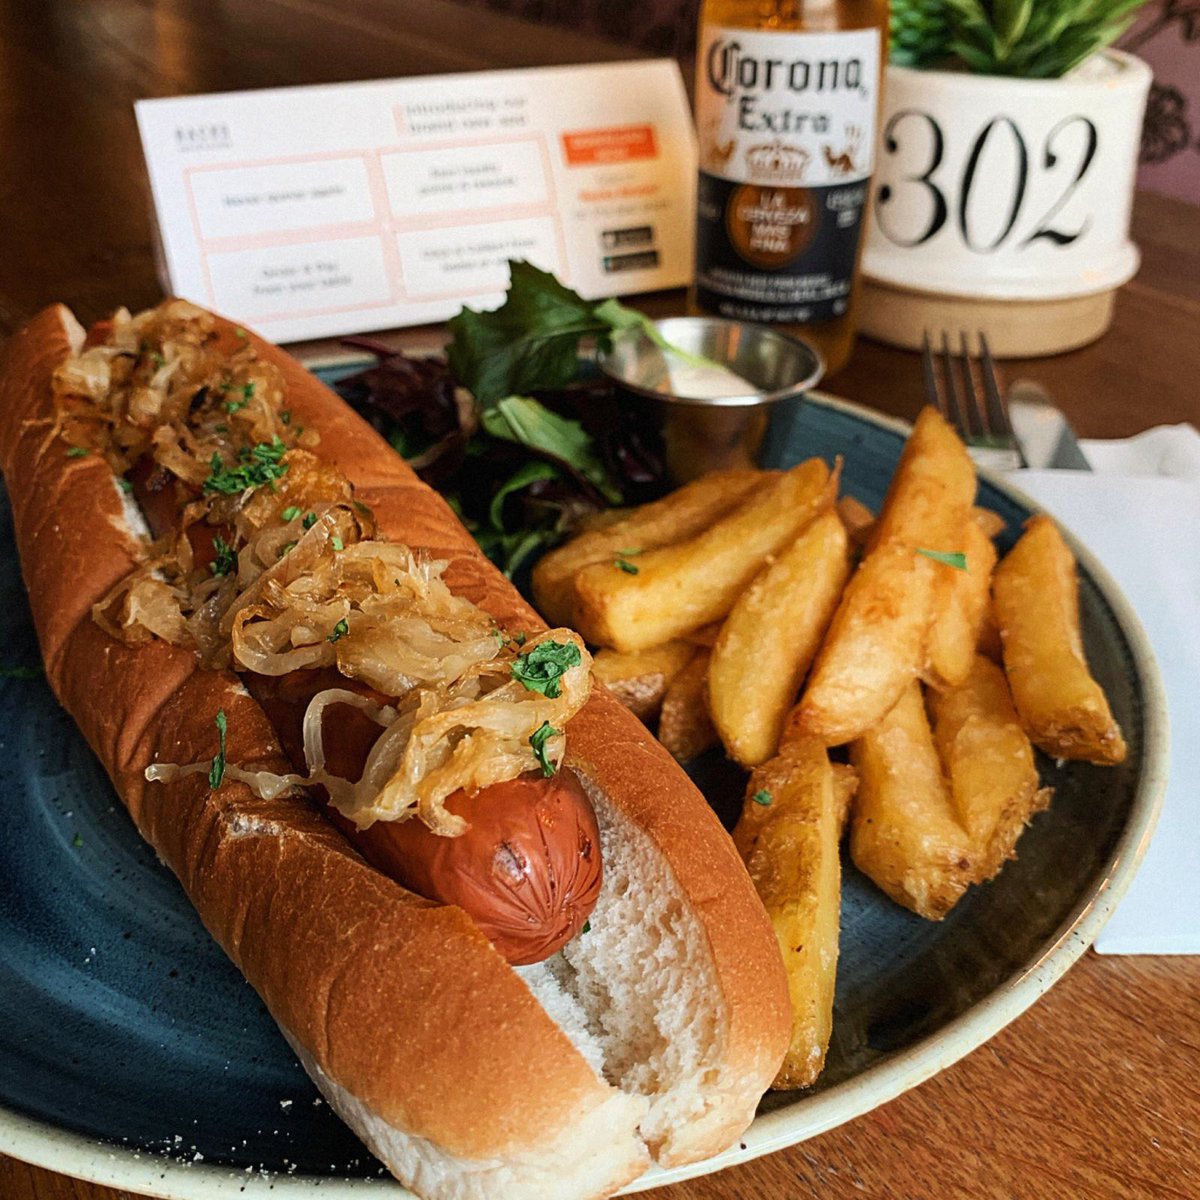 INTRODUCING: THE ‘NOT DOG’

Vegan hot dog topped with fried white onions served with hand cut chips. 

You’ve made it this far in the week, treat yourself! 🙌🏼
#vegan #bristolvegans #veganbristol #bristolfoodie #clifton